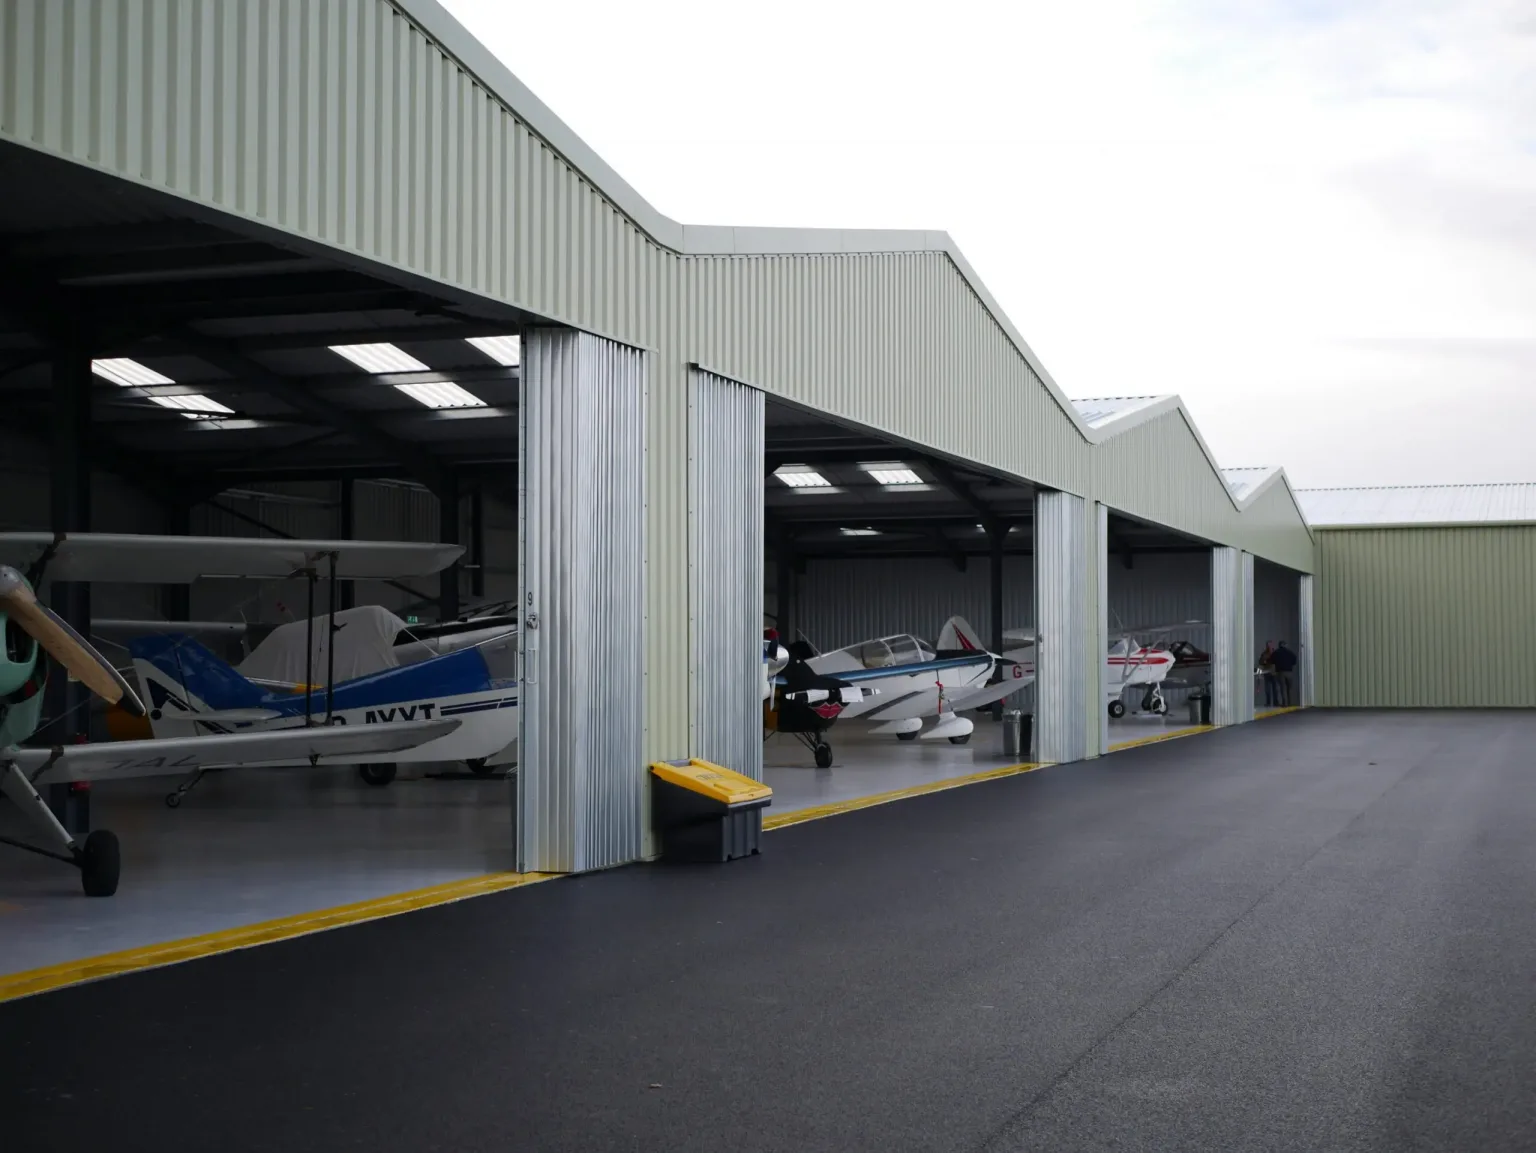 Aircraft hangar with large Wessex Industrial concertina doors opening onto a clear runway